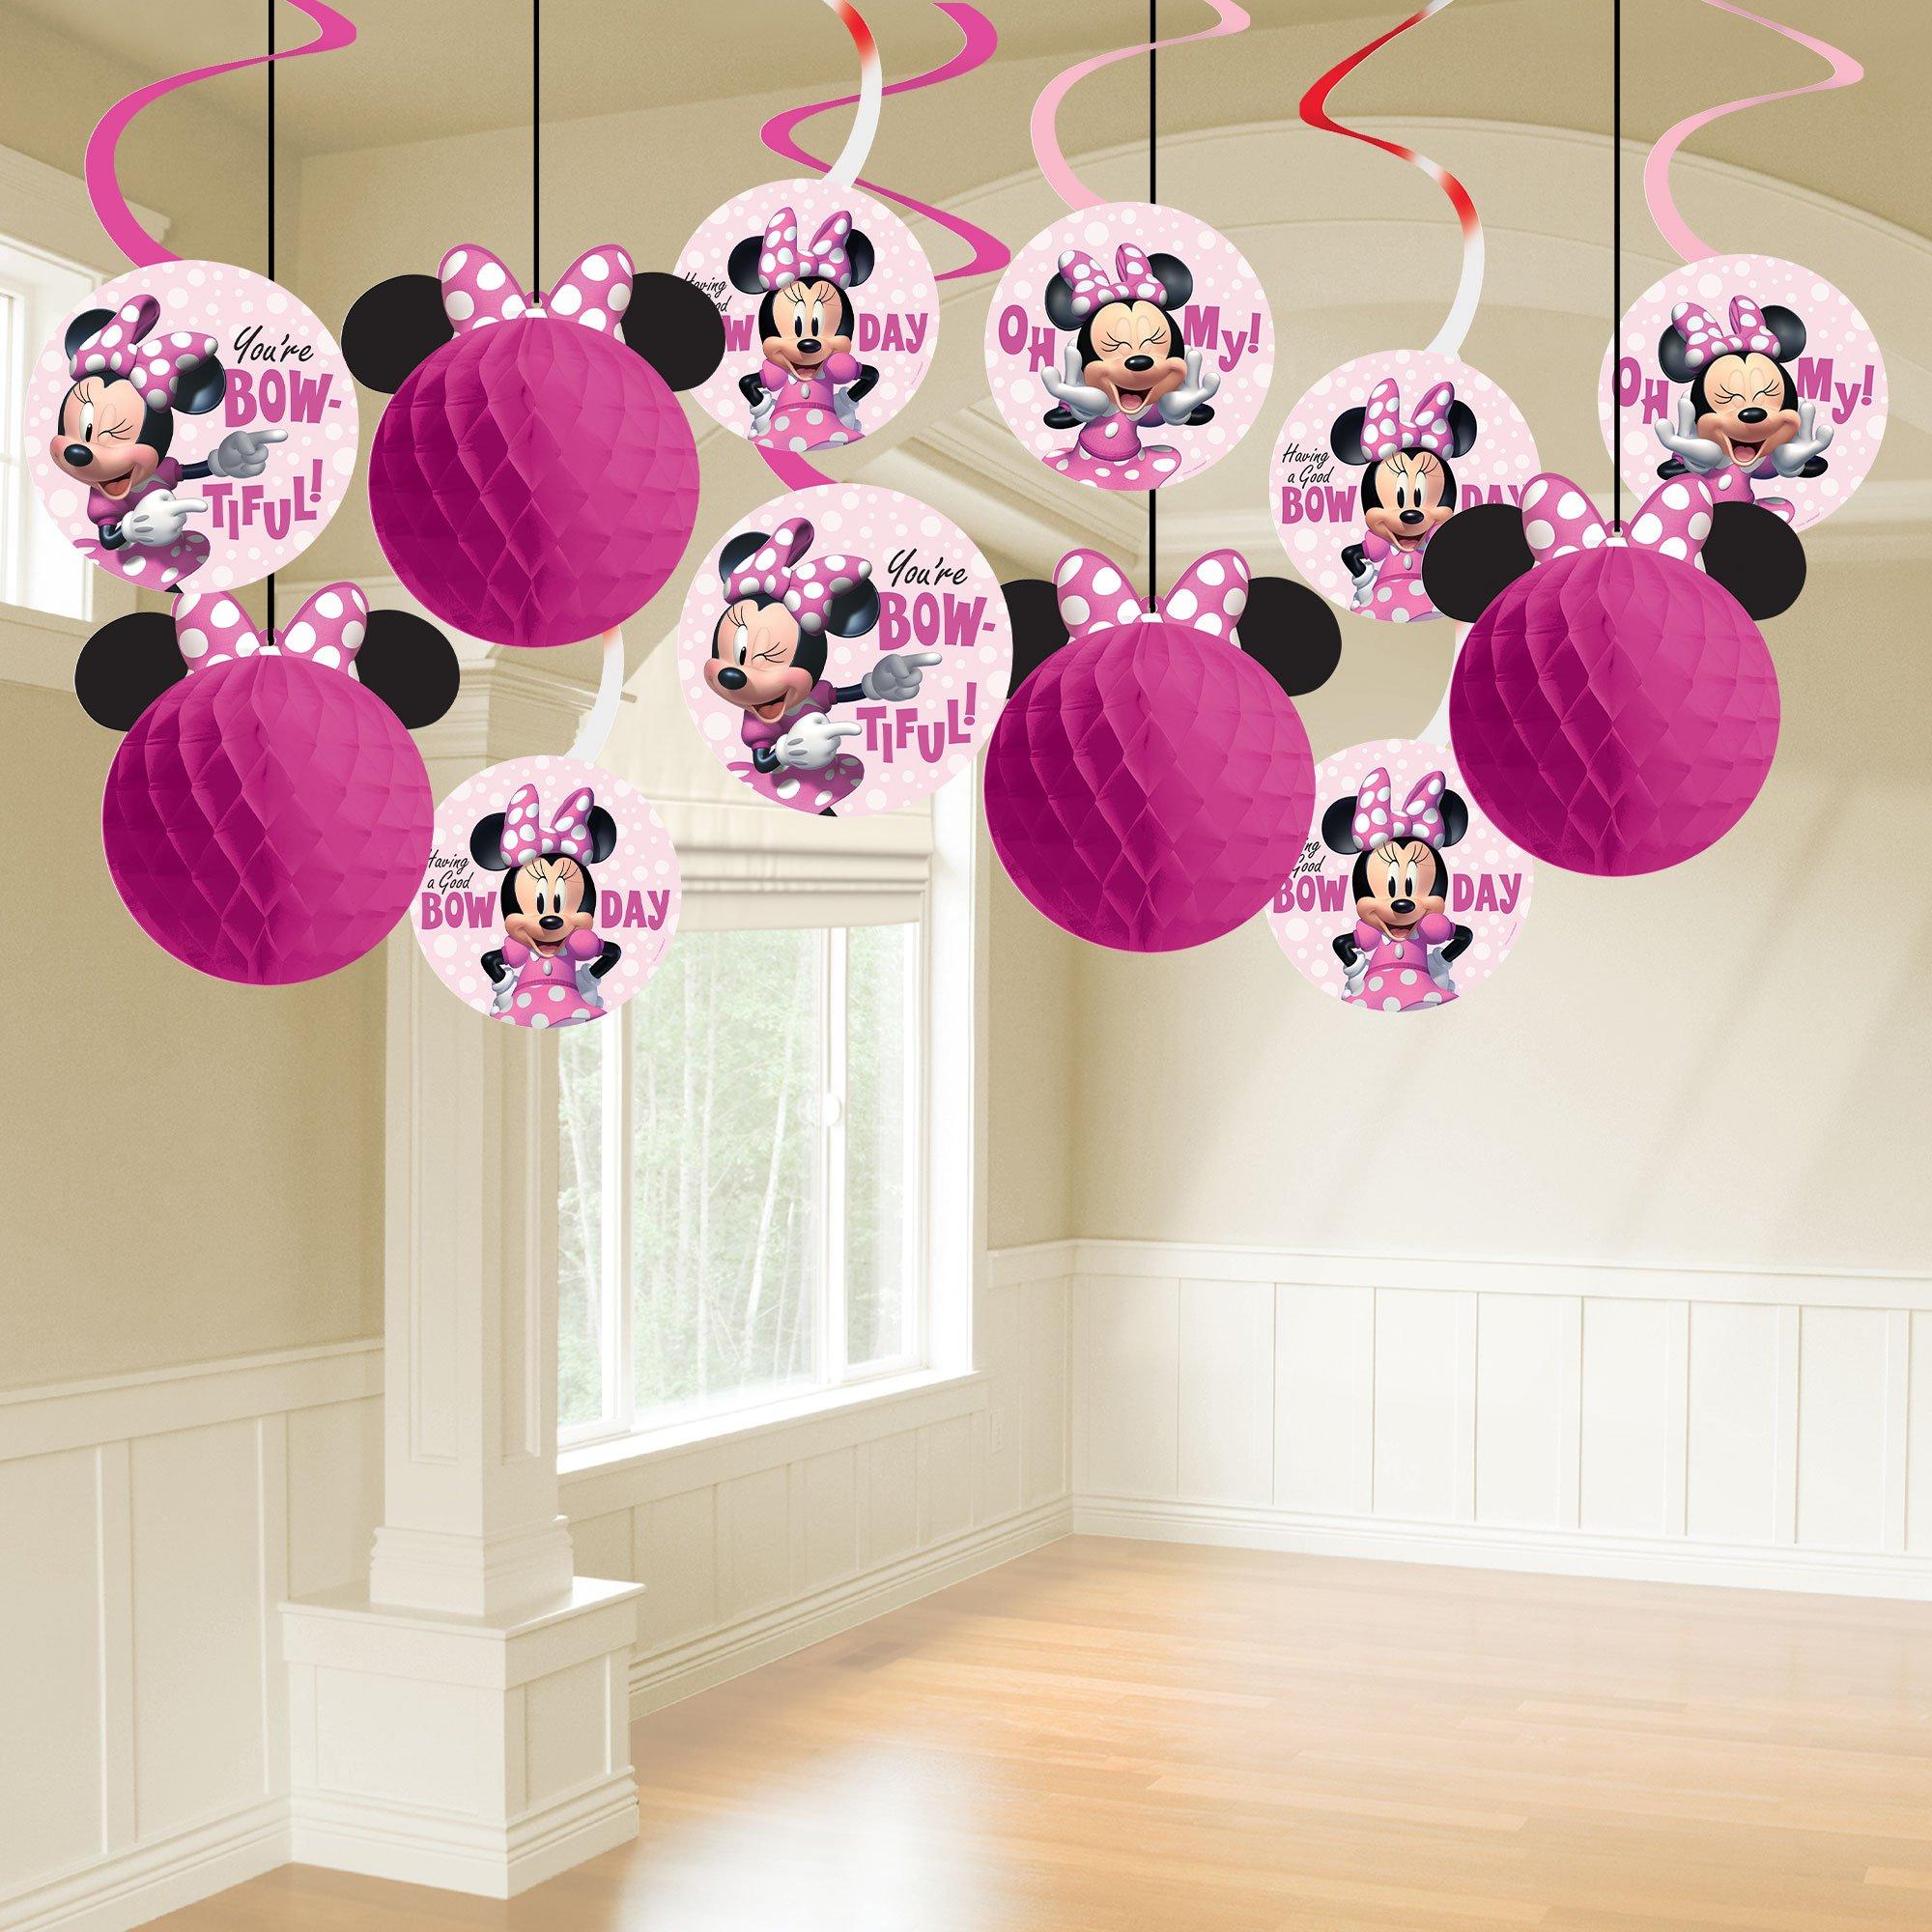 Minnie Slime Party Decoration  Slime party, Party decorations, Minnie